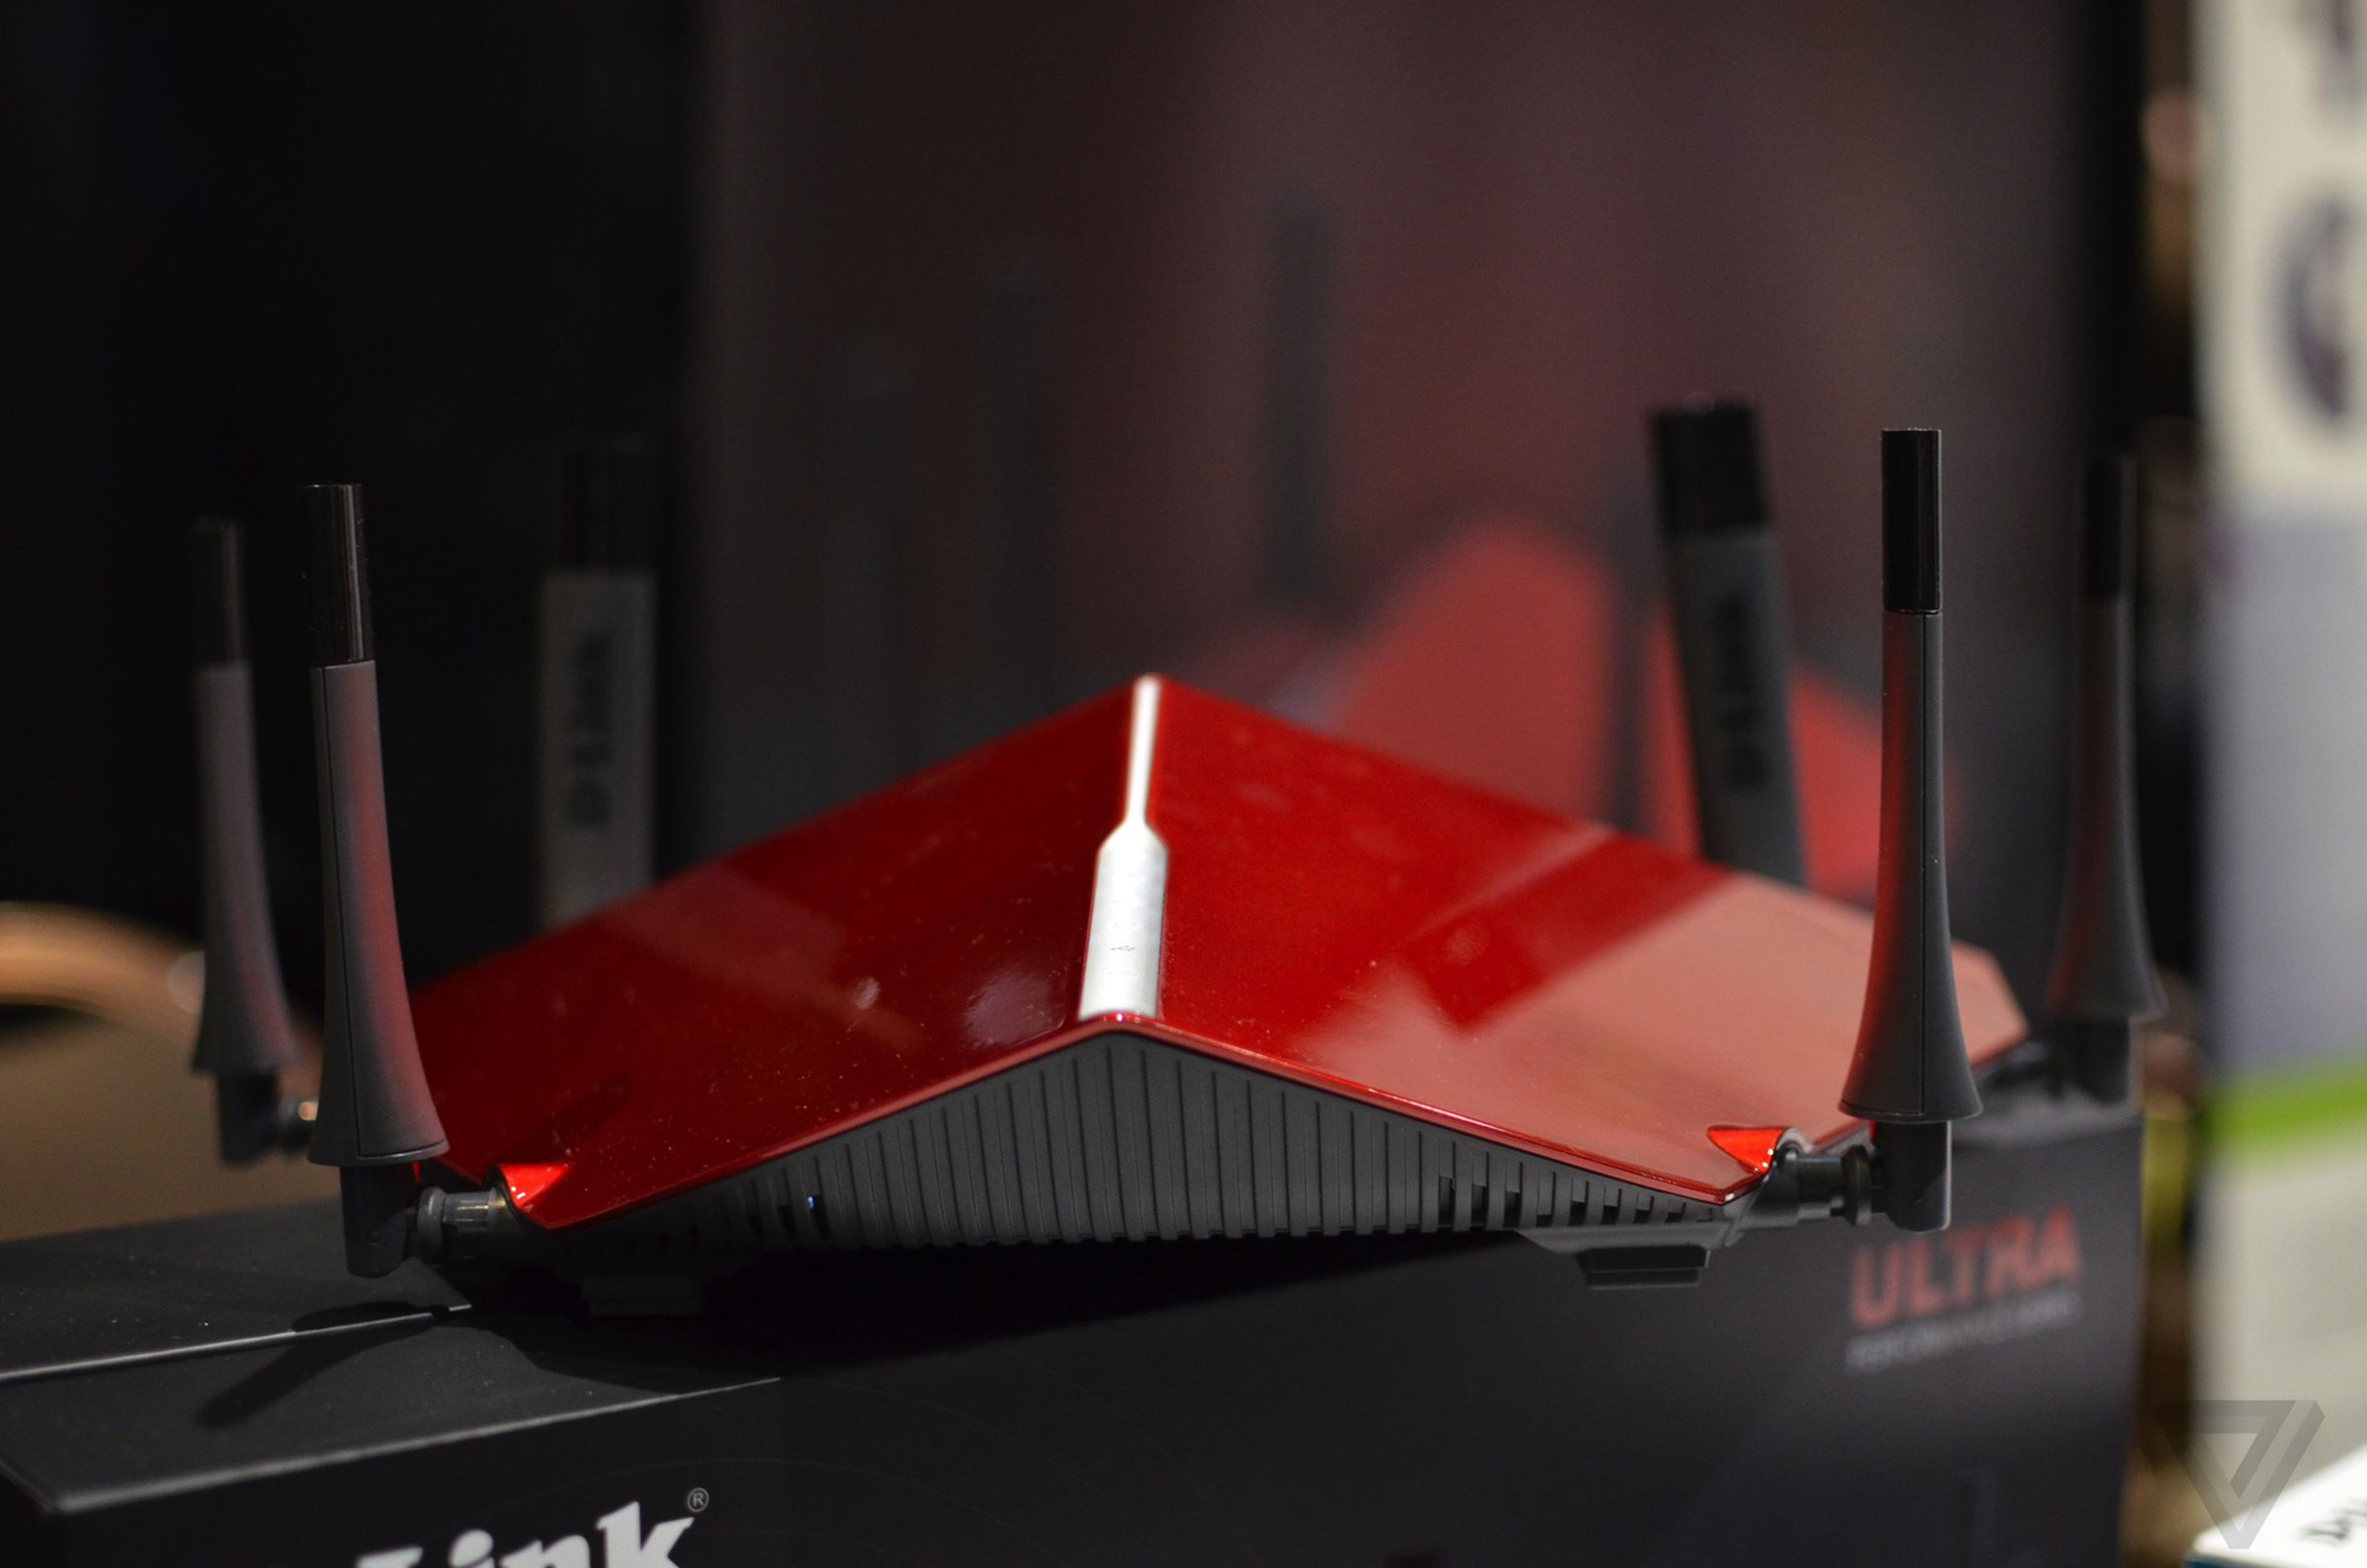 D-Link AC3200 Ultra Wi-Fi Router hands-on images